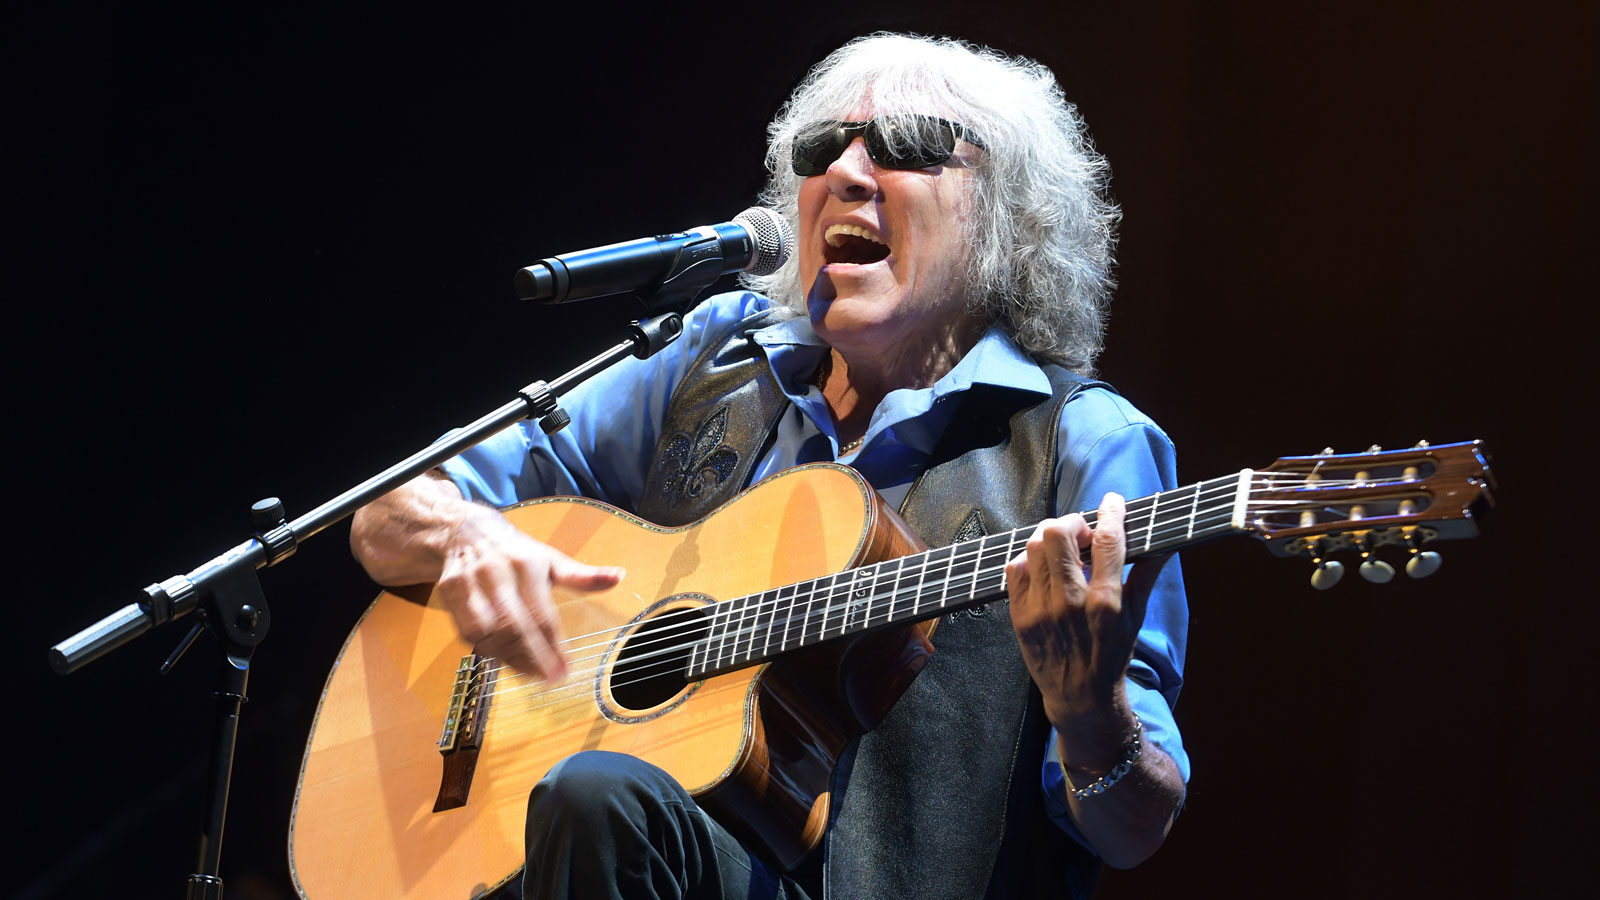 José Feliciano playing guitar at the microphone